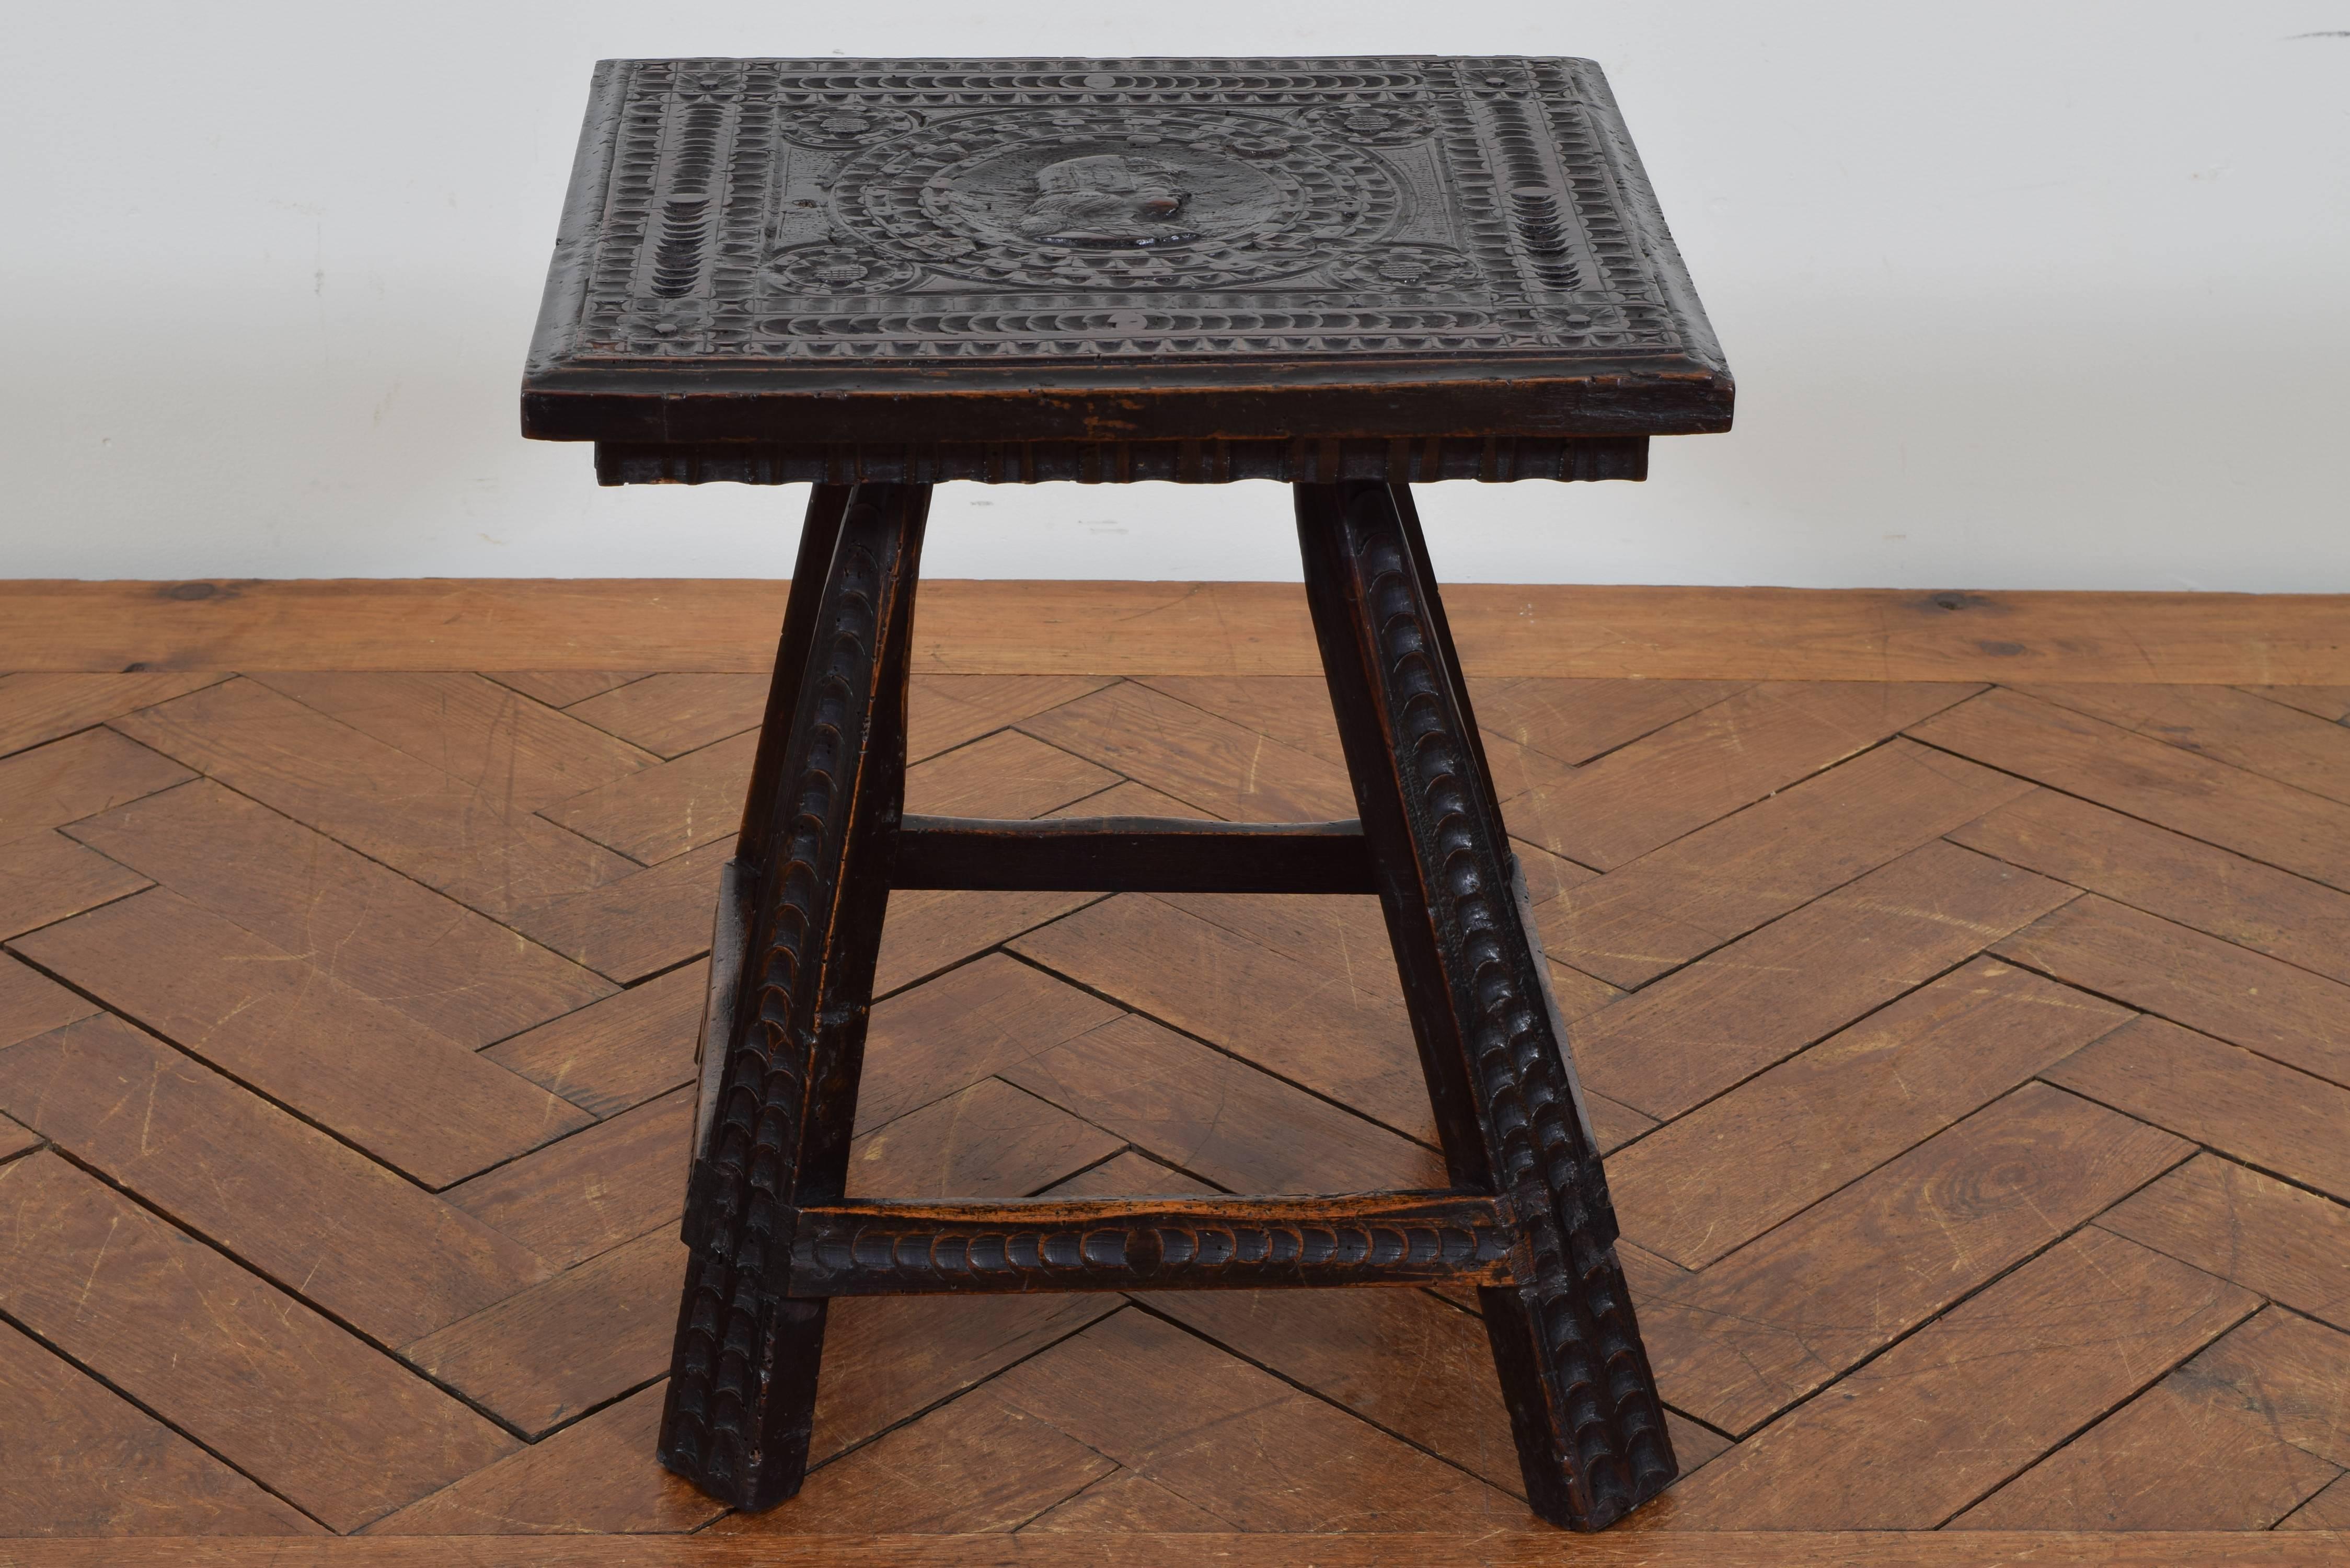 The square top carved with a central figure in profile, raised on slanted legs joined by a square stretcher.